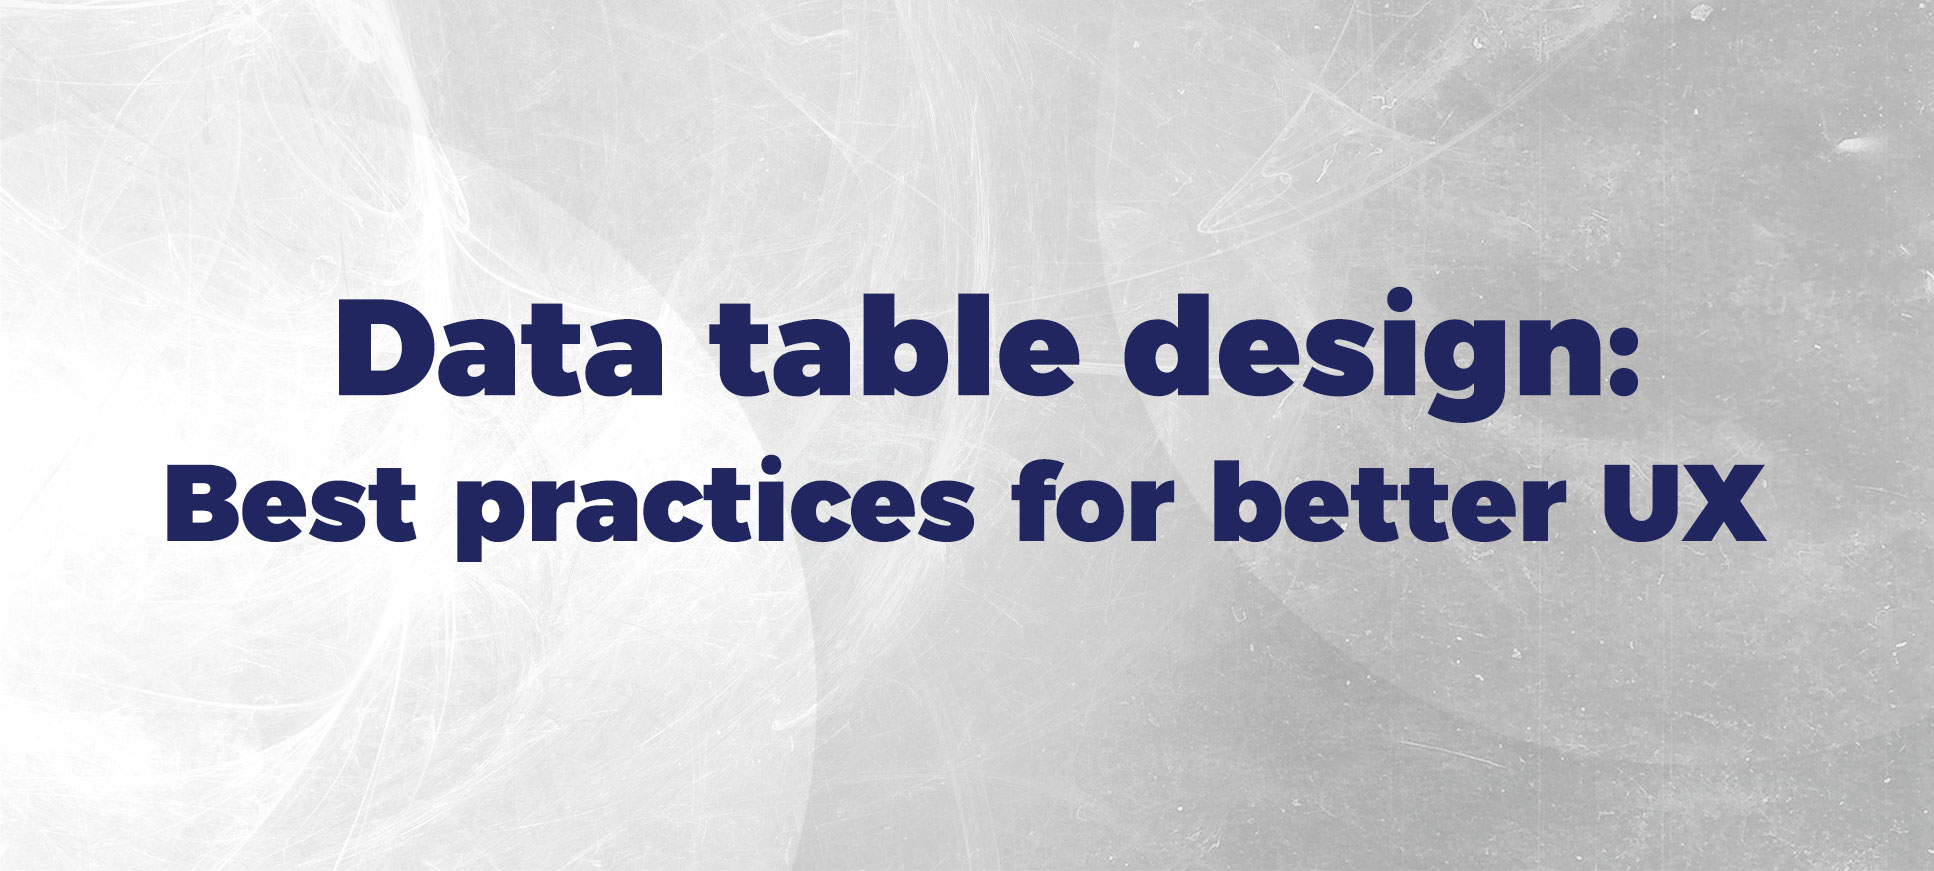 Data table design: Best practices for better UX